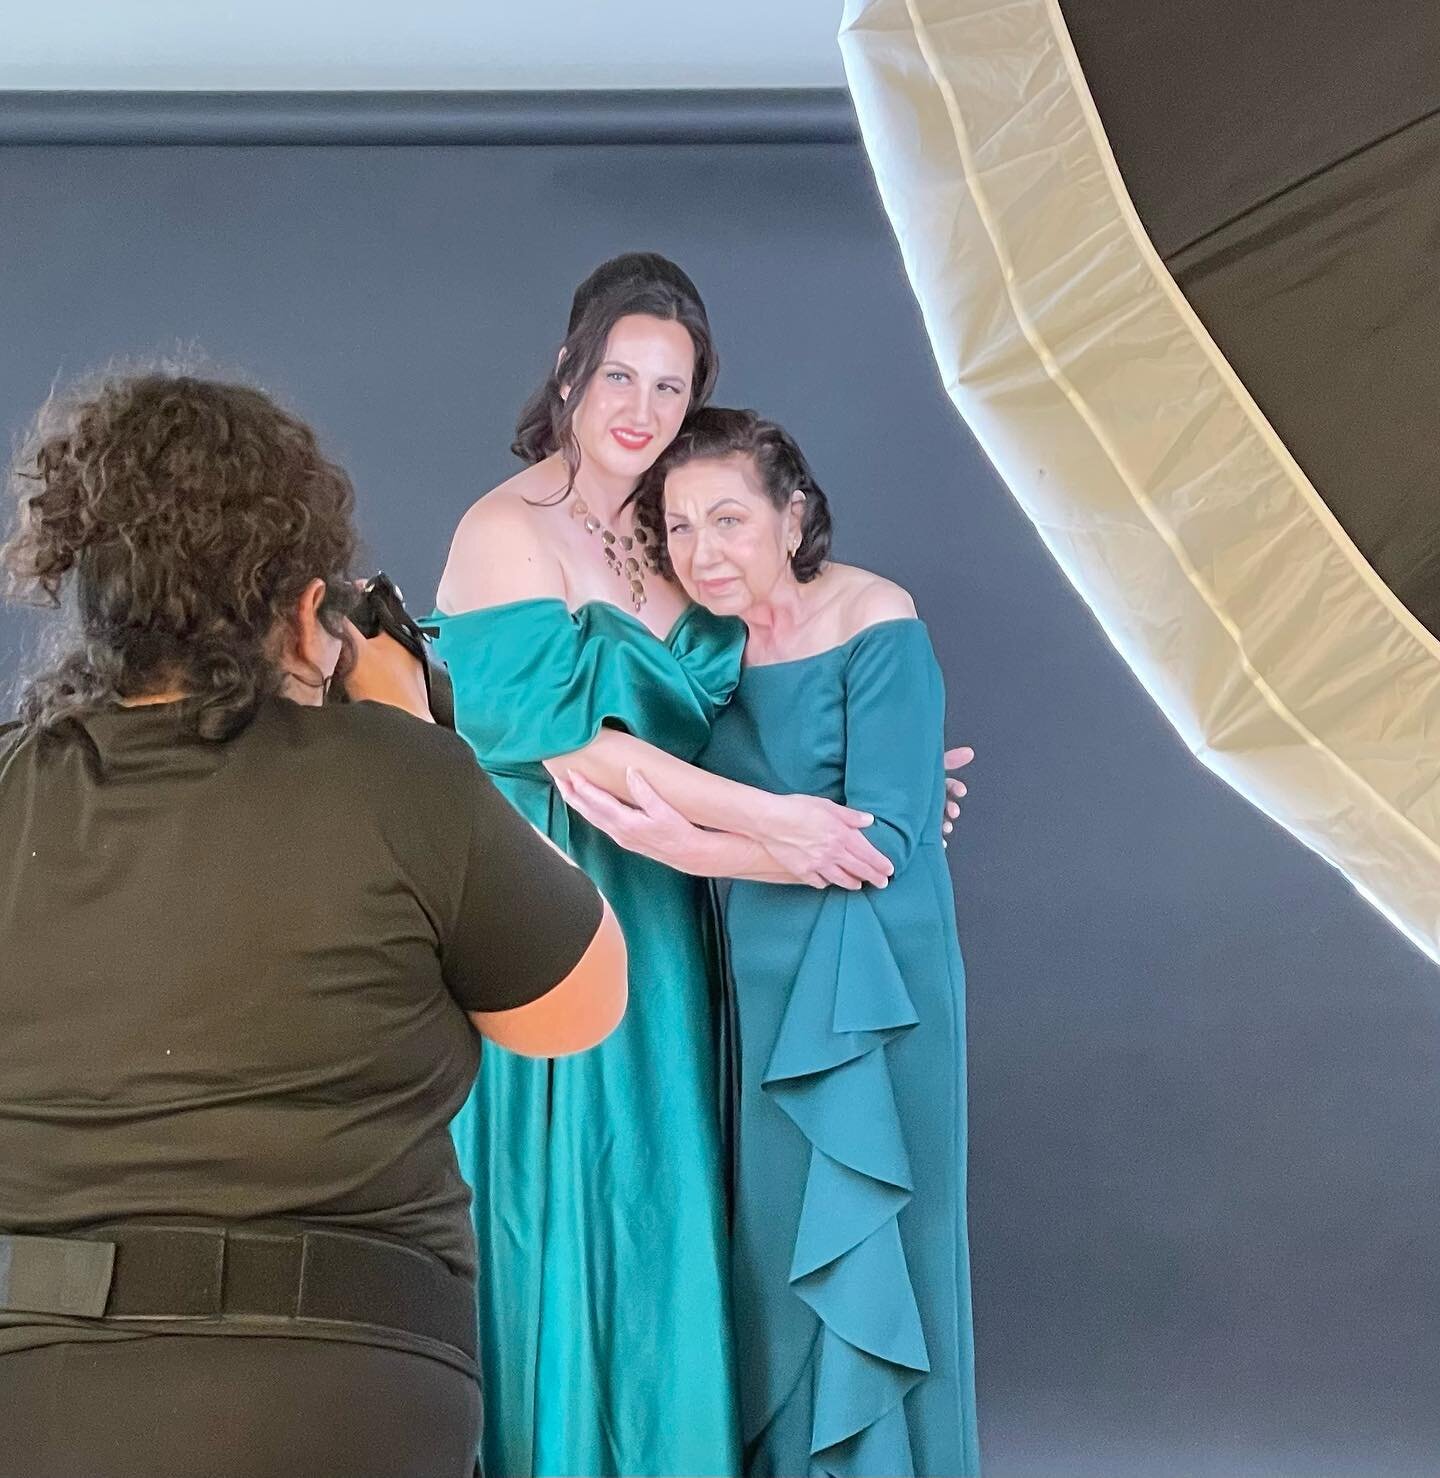 Mother &amp; Daughters photoshoot 🥺. I almost lost it 😢. As I celebrated this beautiful family, I was also celebrating my momma&rsquo;s memories. She passed away 12 years ago and I know how important these portraits are and will be. My heart is ful